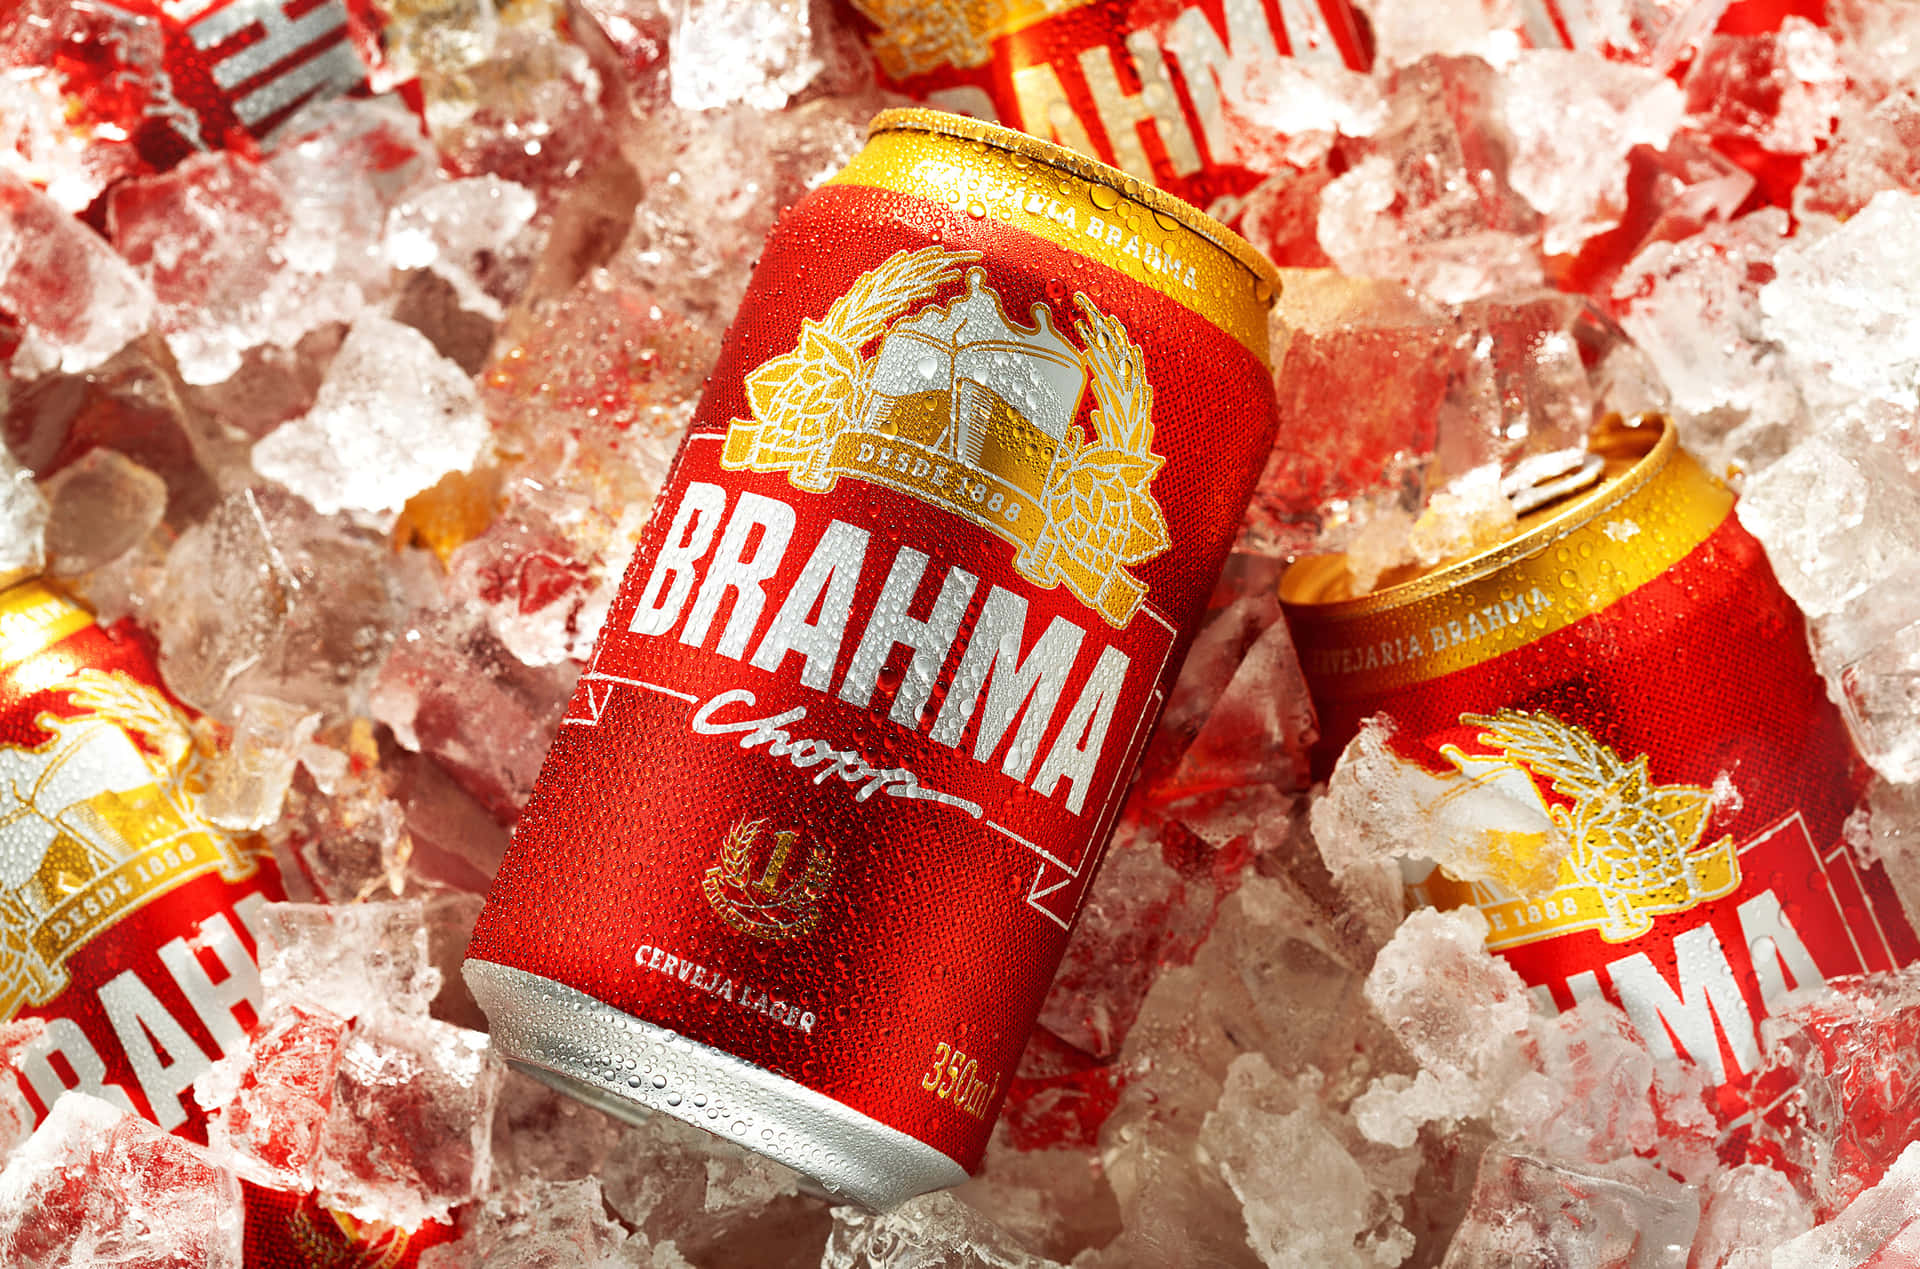 Brazilian Brahma Beer Cans On Ice Cubes Wallpaper